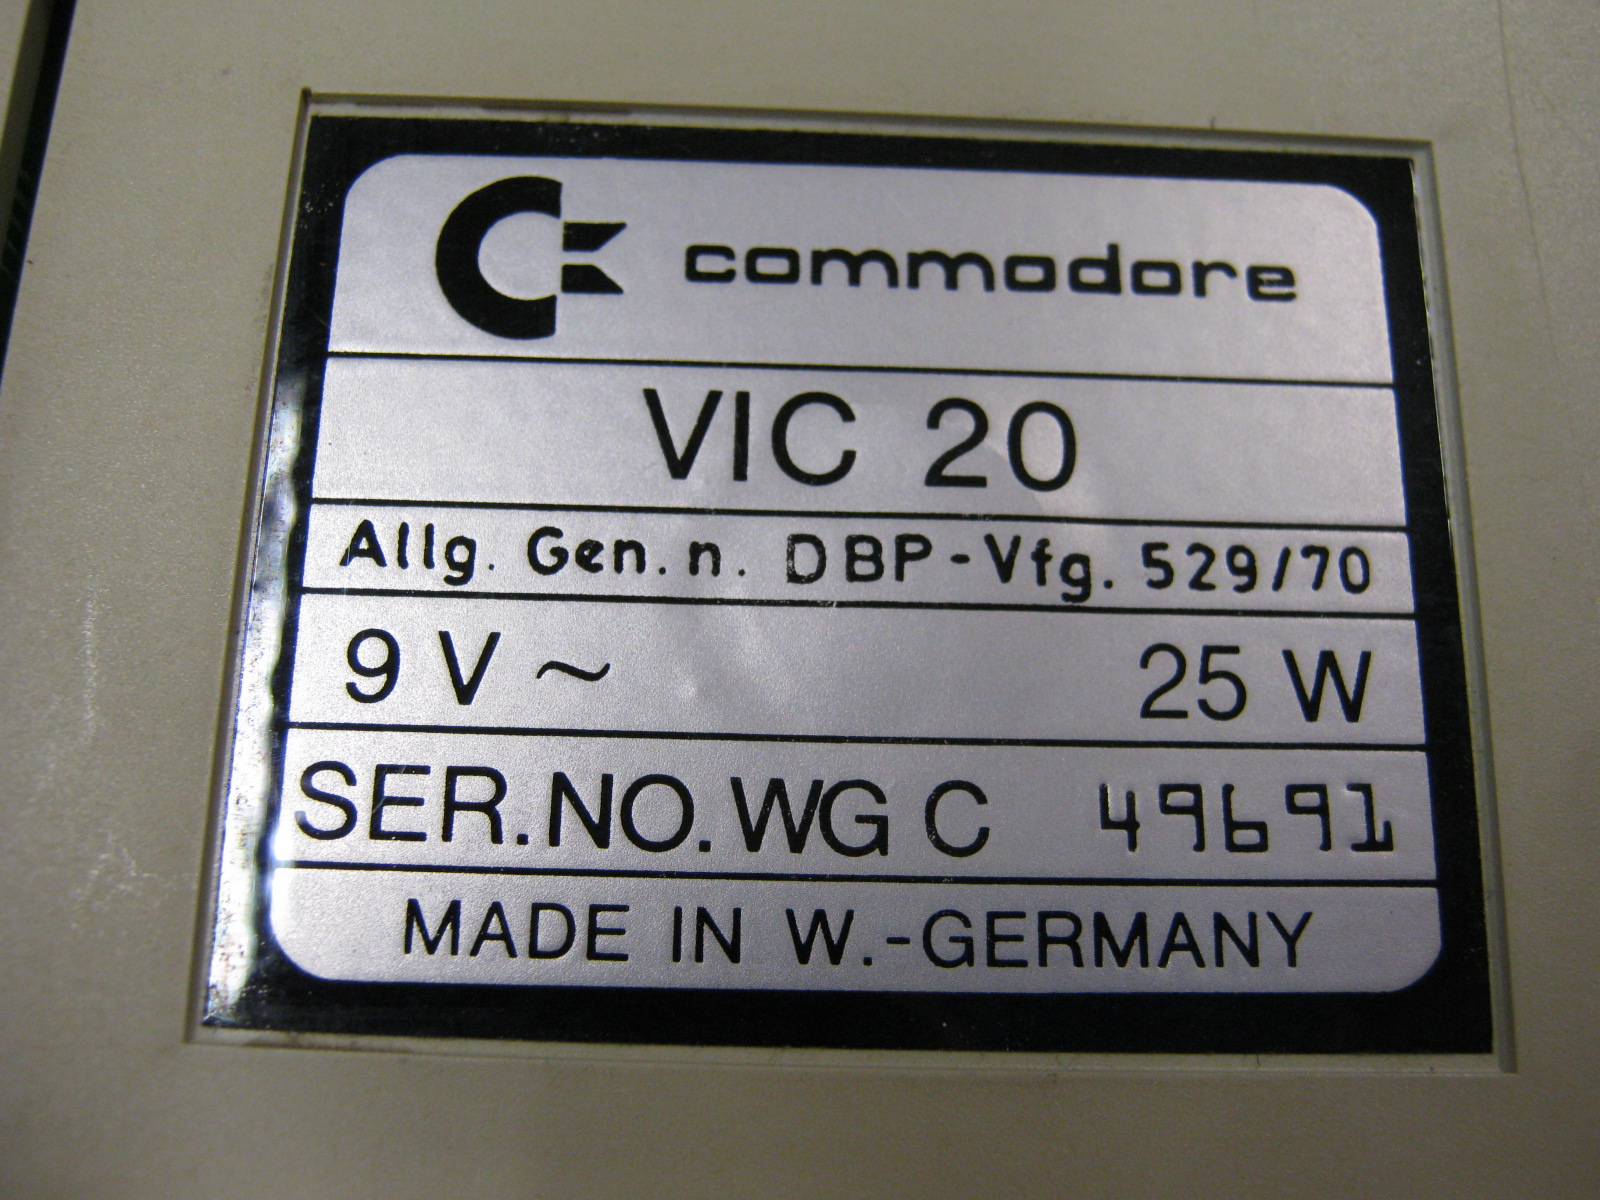 http://museodelcomputer.org/parts/commodore/VIC20_2/IMG_5227.jpg